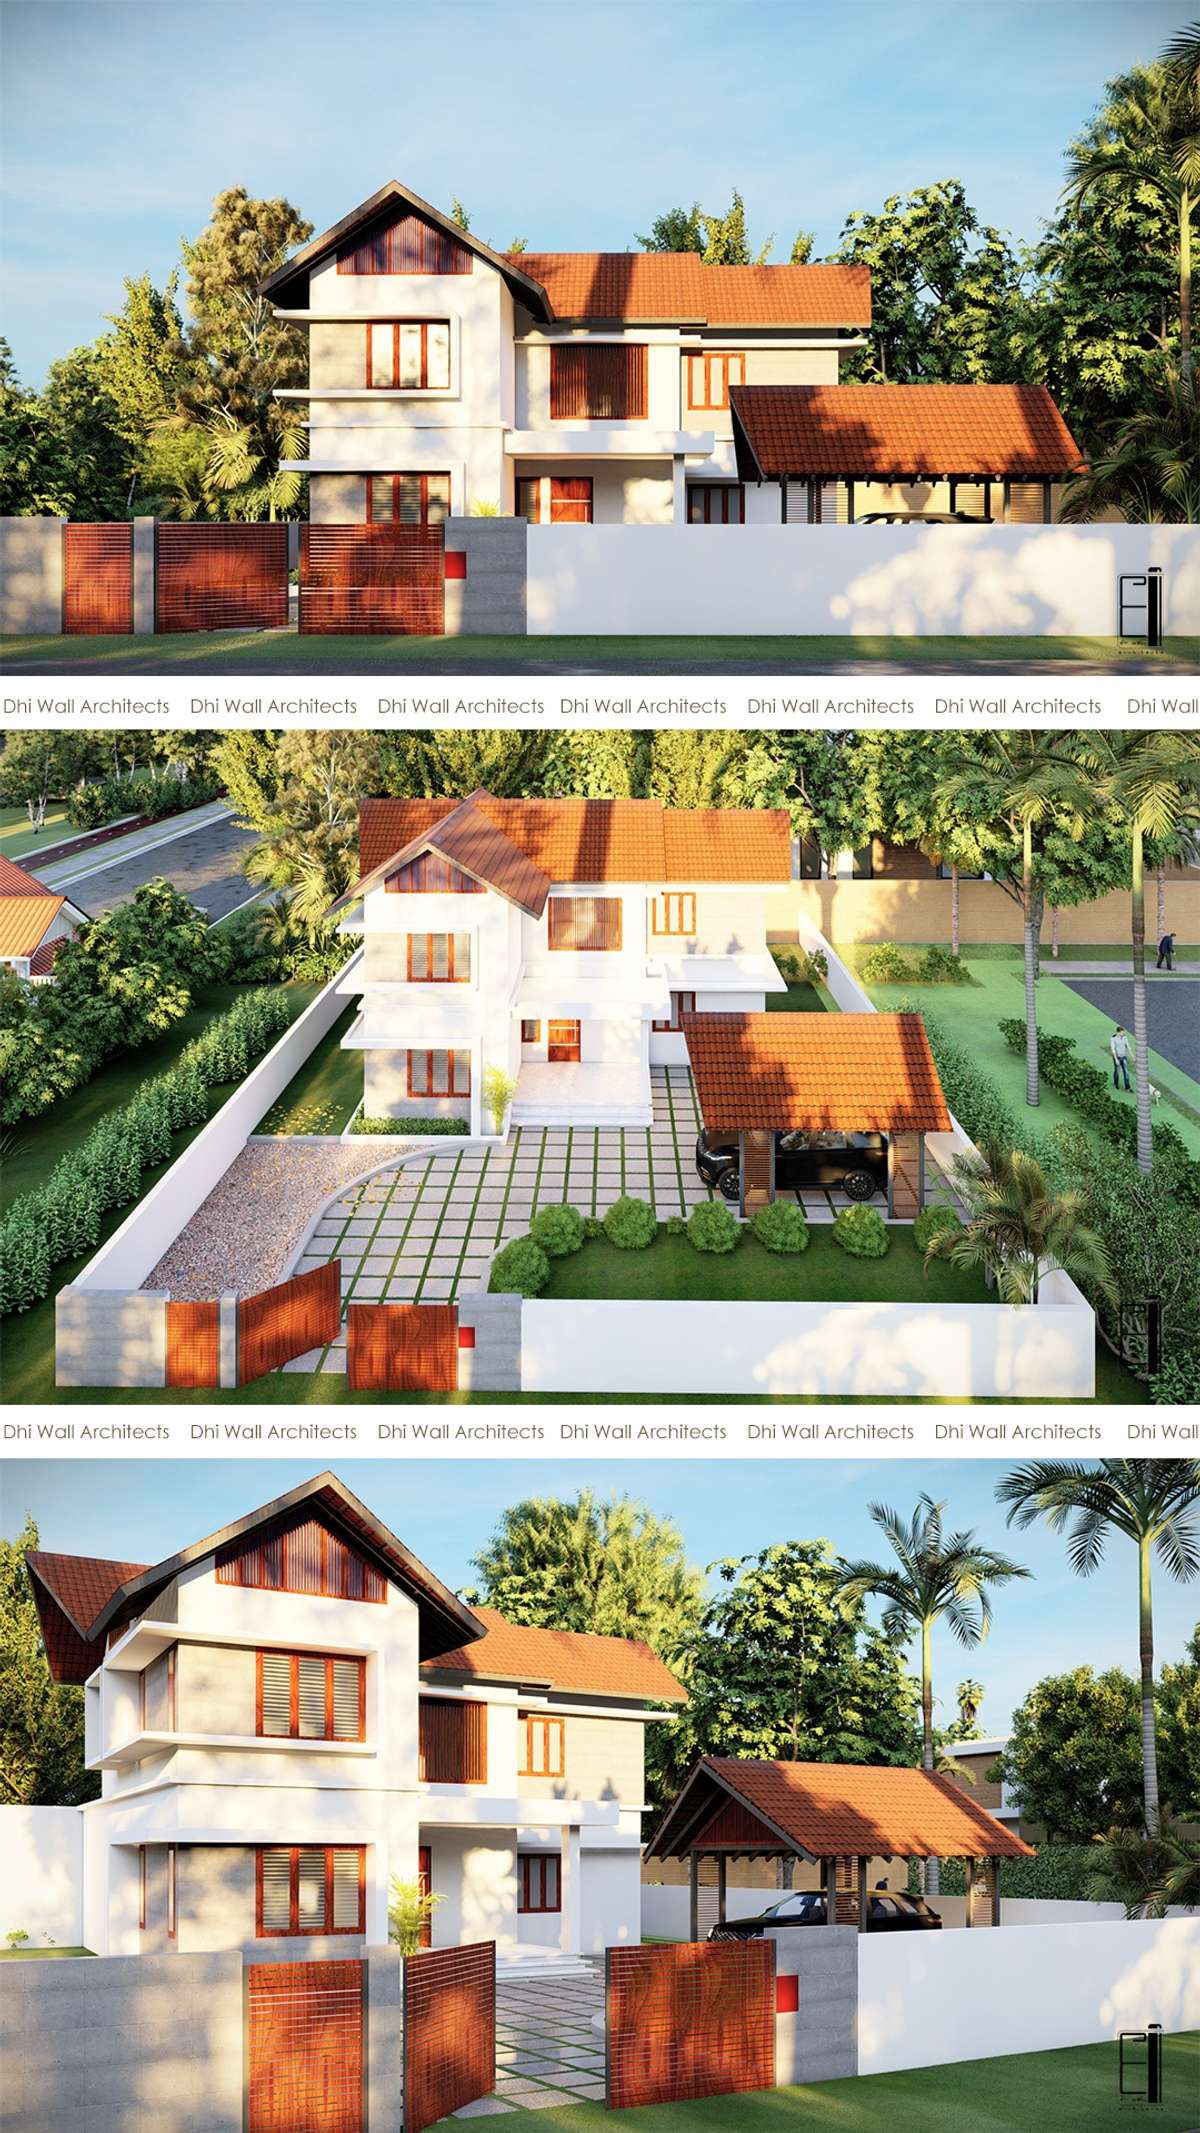 Designs by Architect dhi wall Architects, Kannur | Kolo